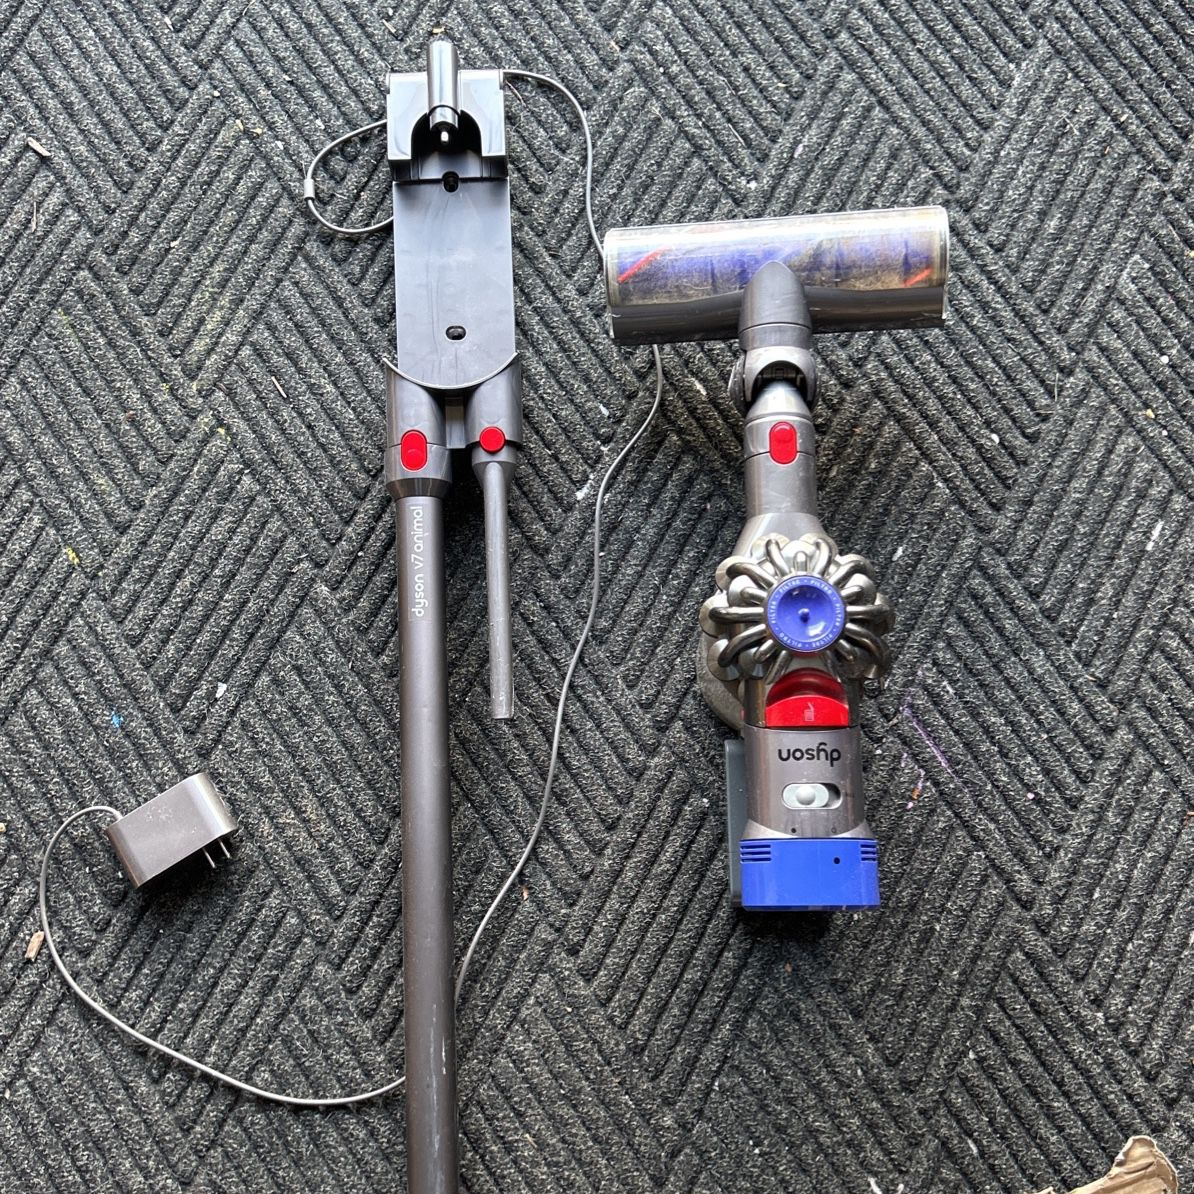 Old Dyson Vacuum- Charging Issue. 